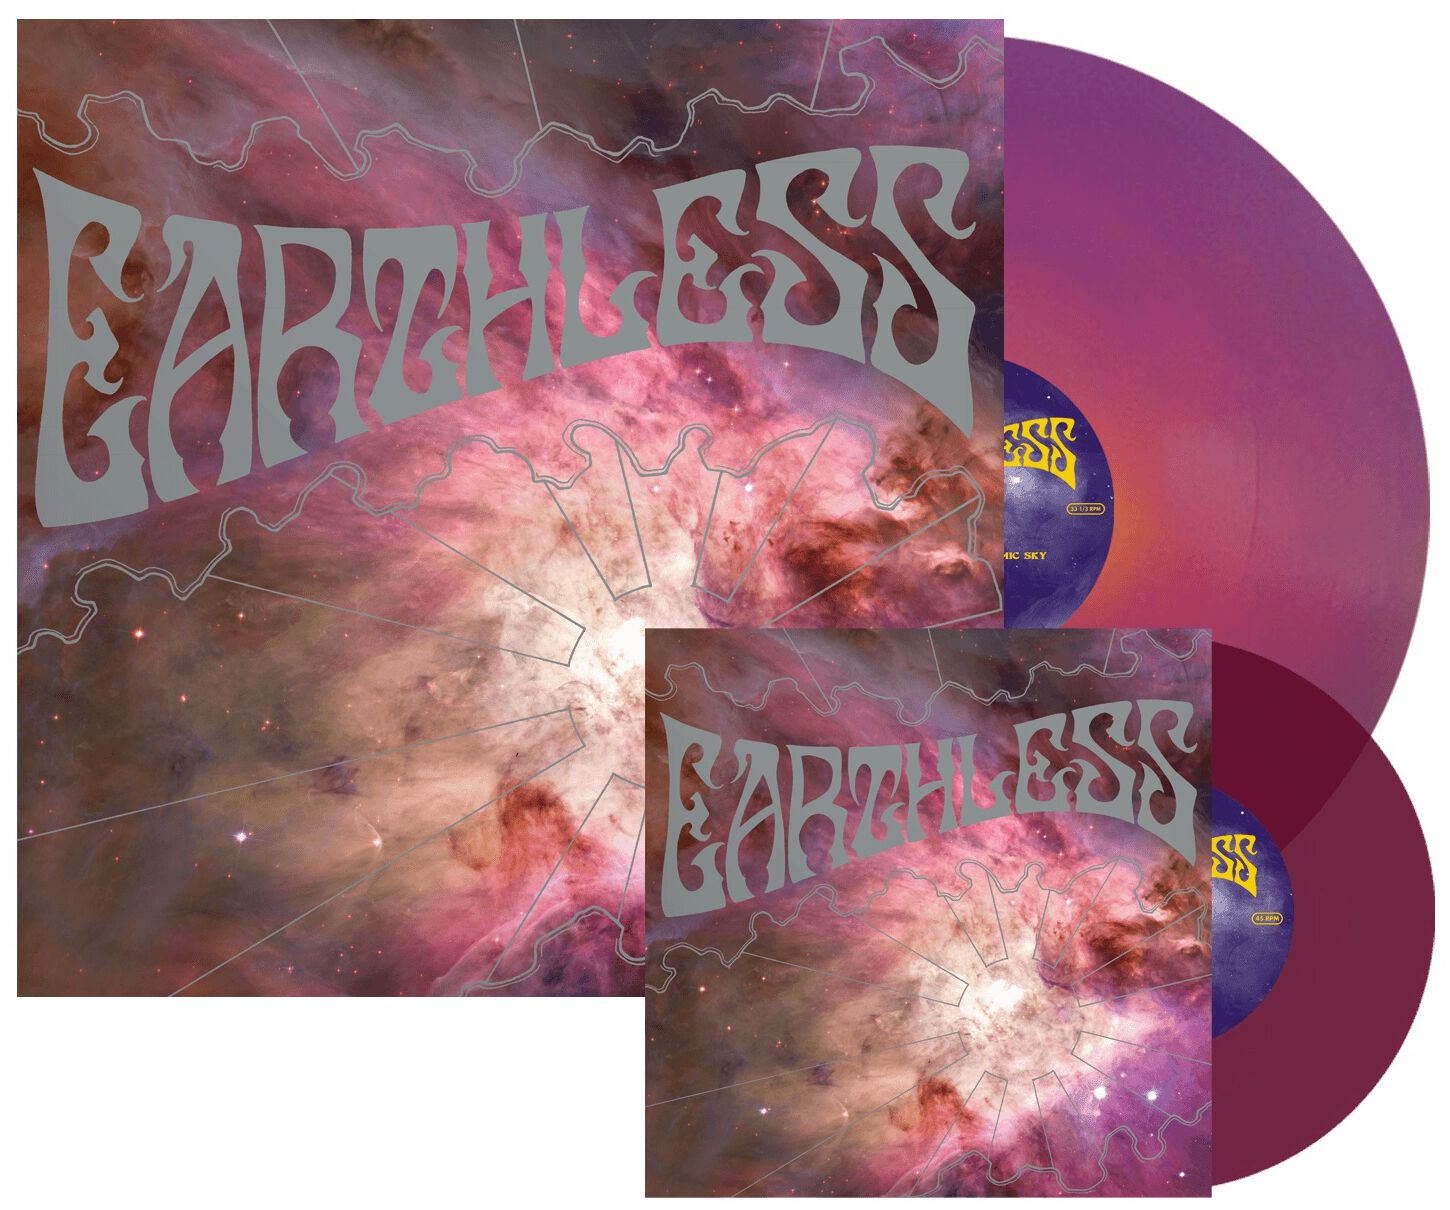 Image of Earthless Rhythms from a cosmic sky LP & 7 inch farbig